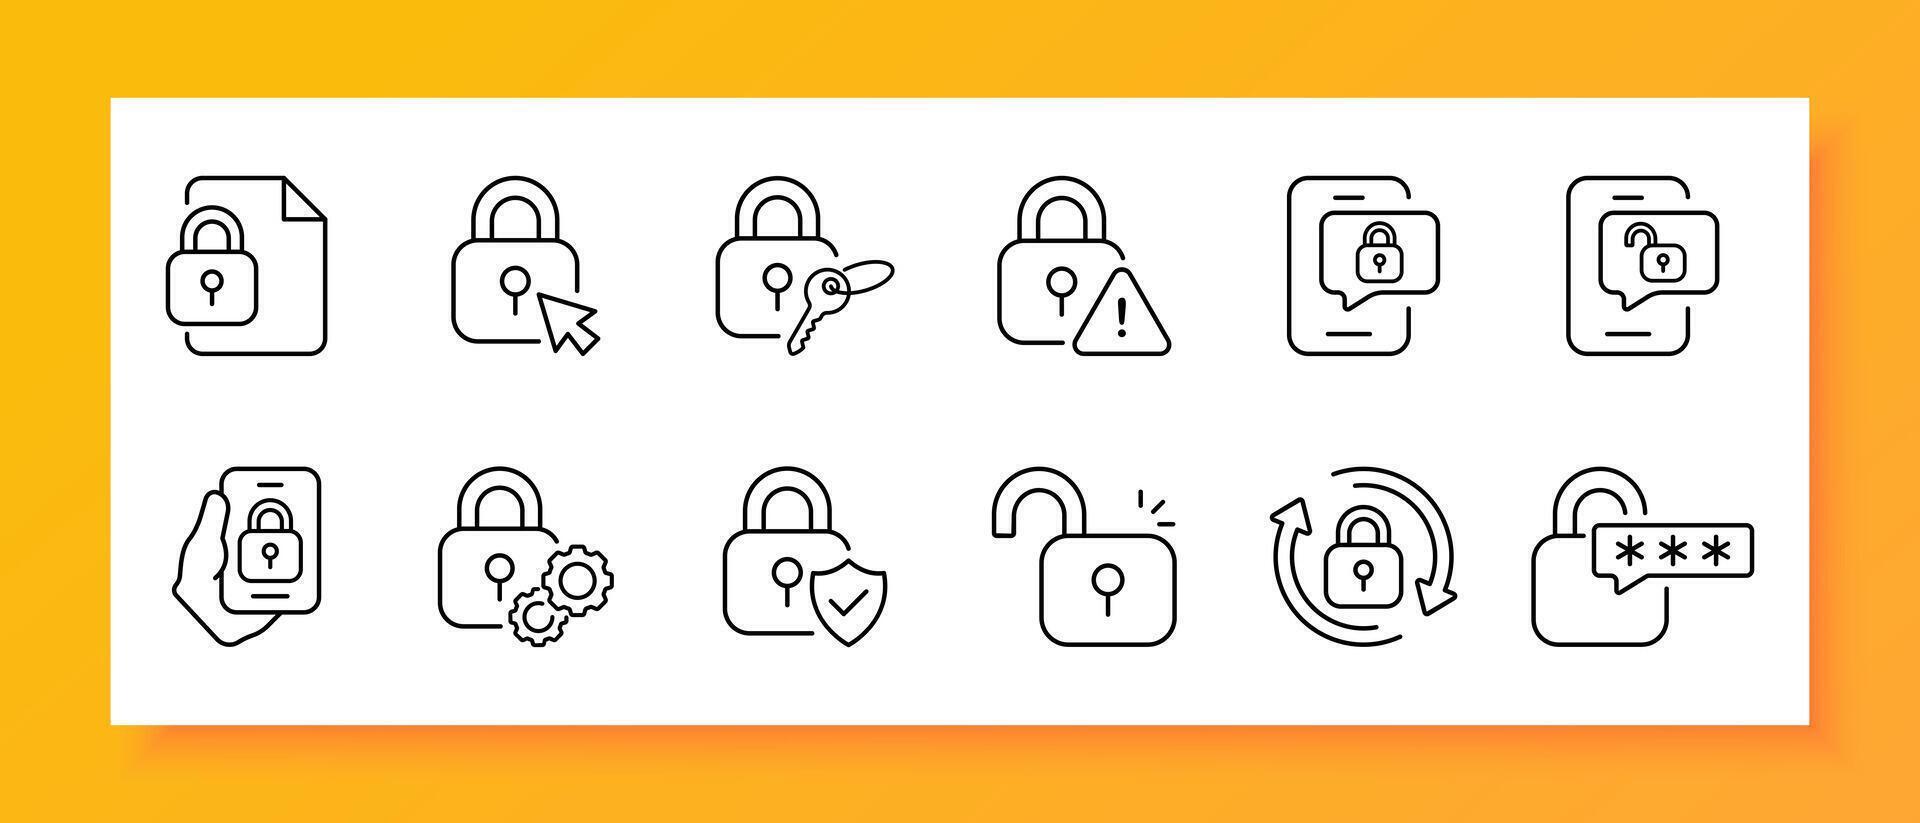 Security icon set. Threat, password, lock, key, internet, smartphone, file, gears, two-step authentication. Black icon on a white background. Vector line icon for business and advertising